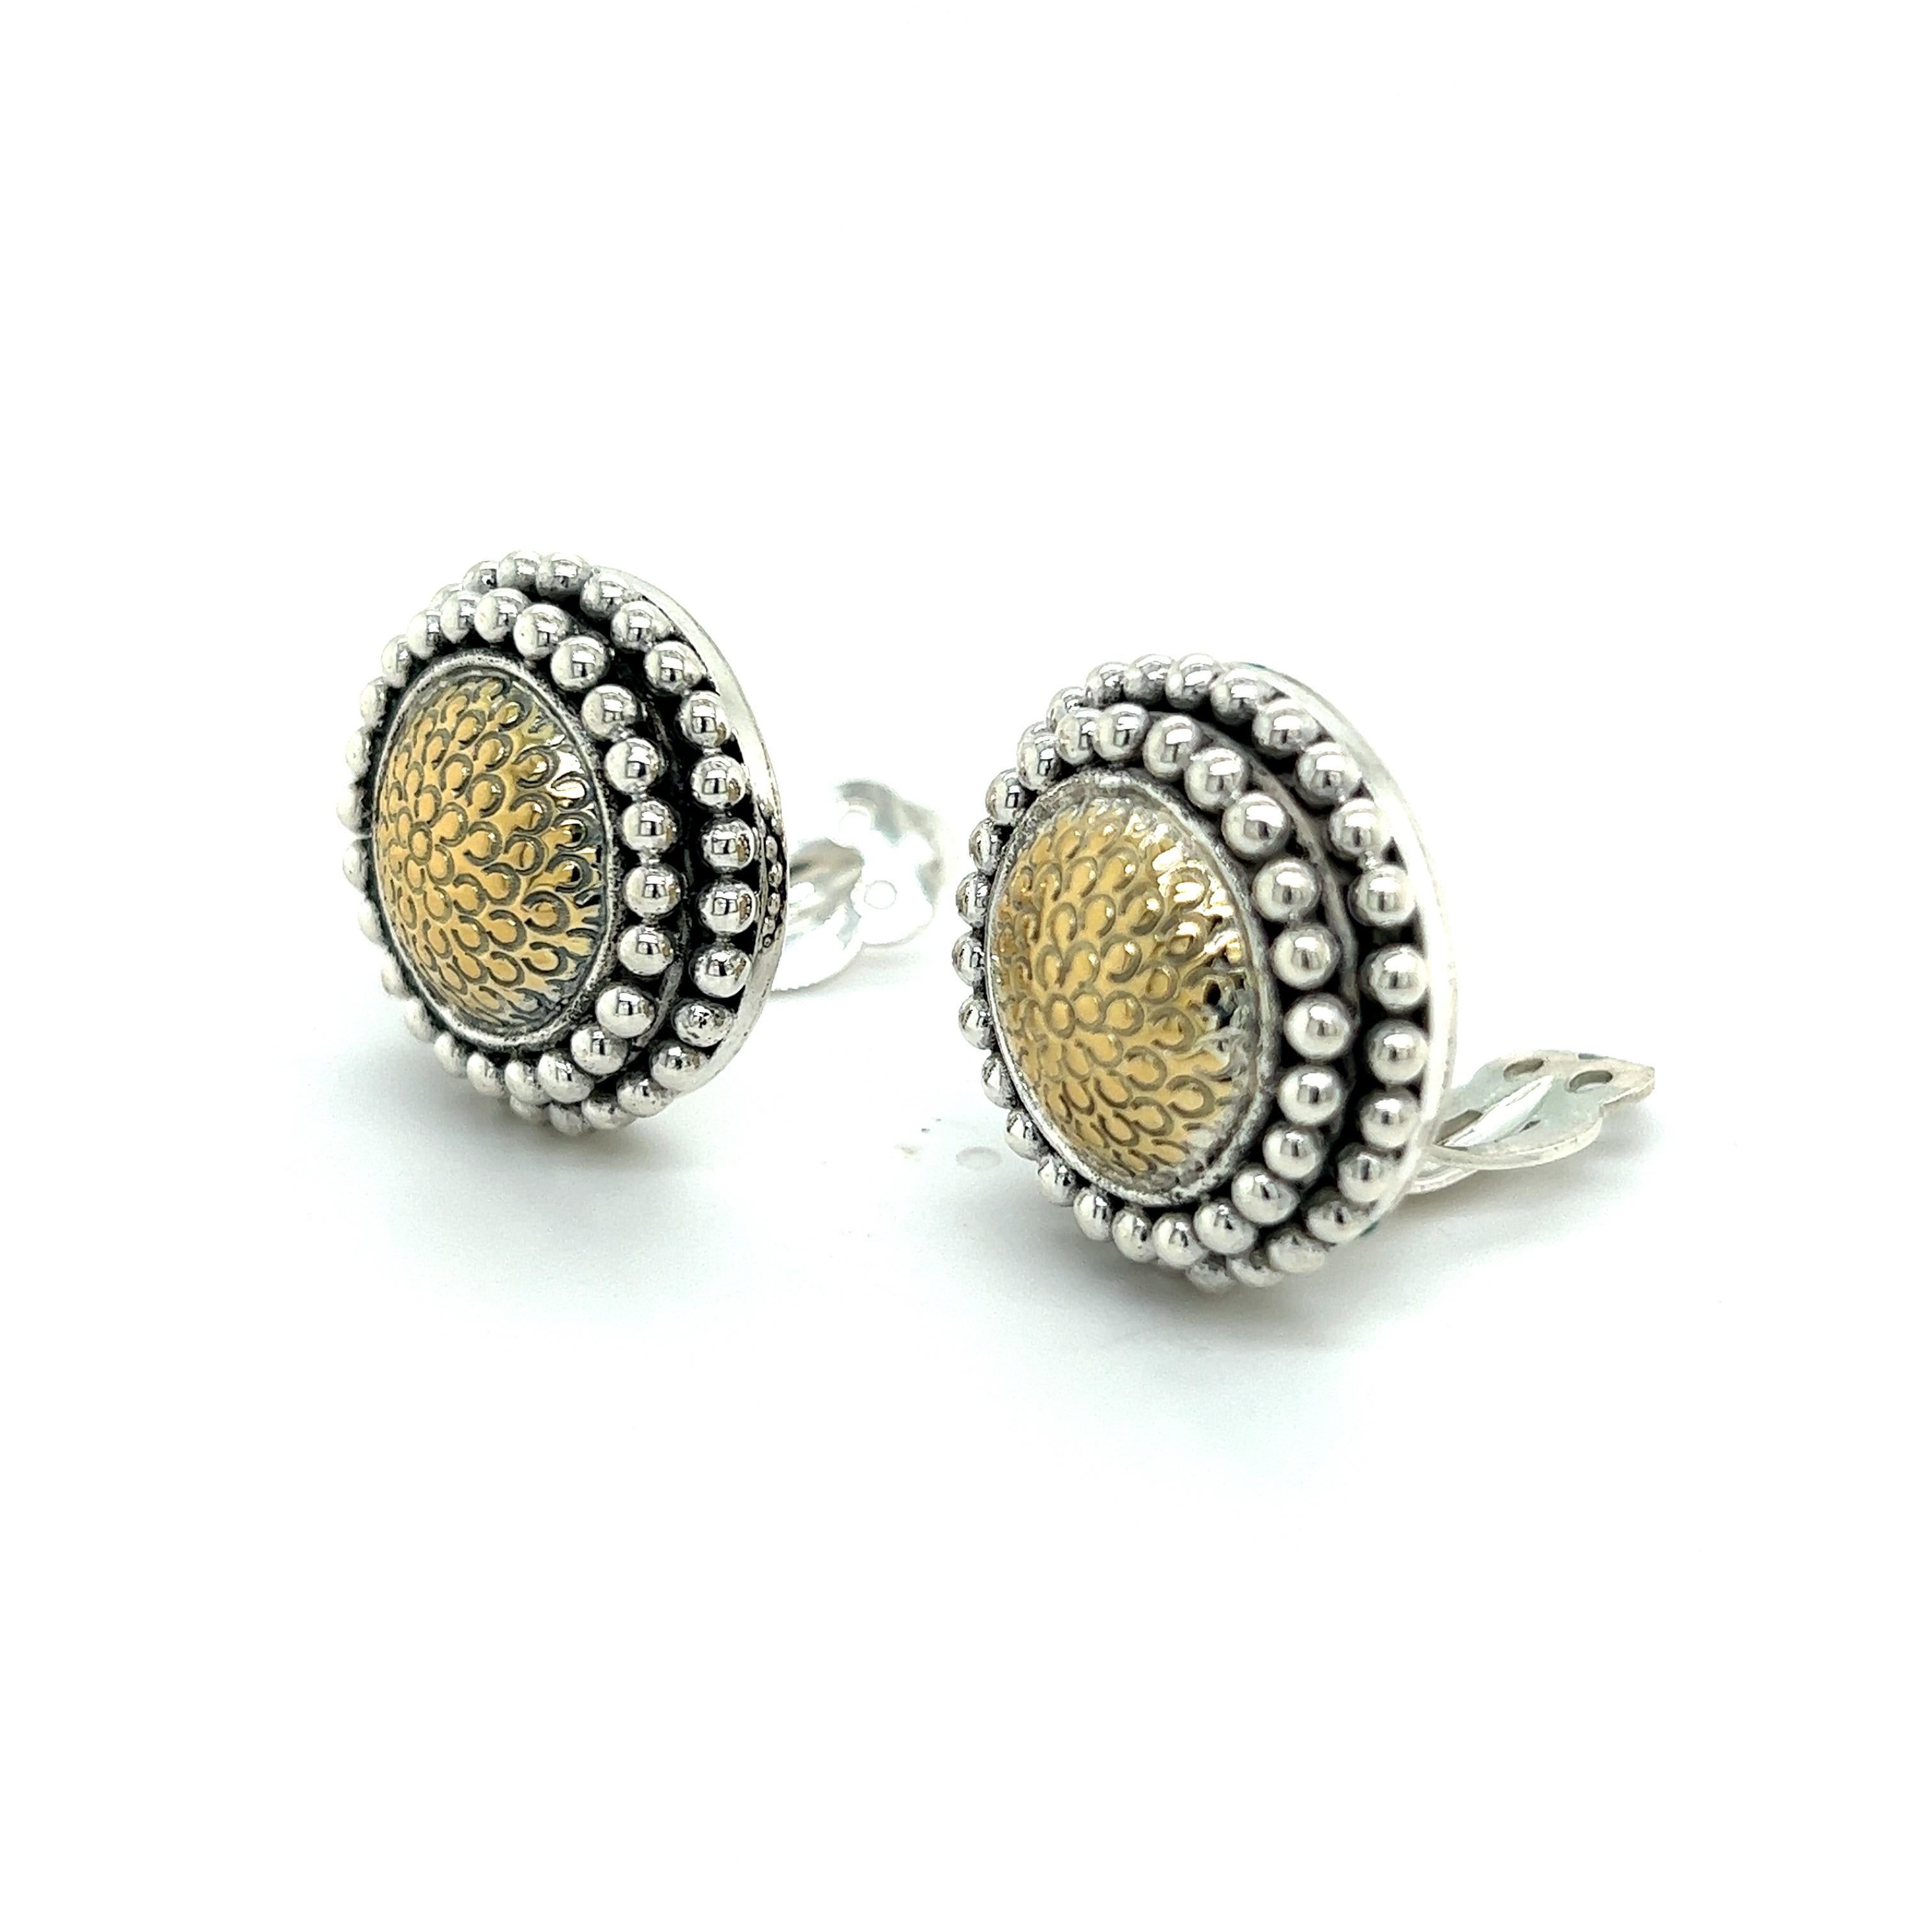 John Hardy Estate Clip-on Earrings 18k + Silver JH63

TRUSTED SELLER SINCE 2002

PLEASE SEE OUR HUNDREDS OF POSITIVE FEEDBACKS FROM OUR CLIENTS!!

FREE SHIPPING!!

DETAILS
Earrings: Clip-on
Weight: 28 Grams
Metal: 18k Yellow Gold+ Sterling